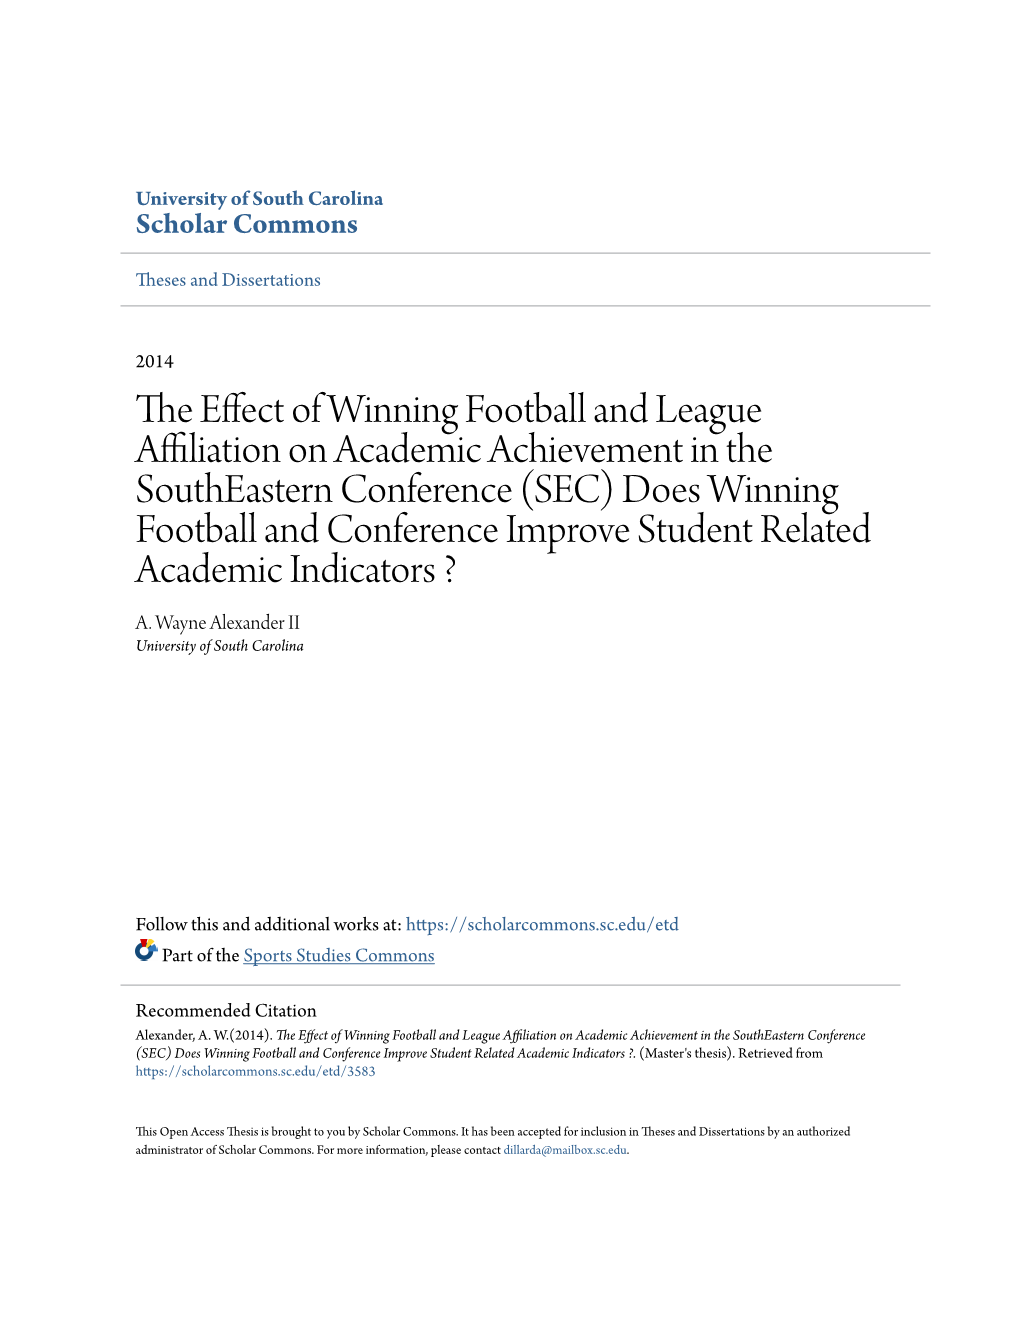 The Effect of Winning Football and League